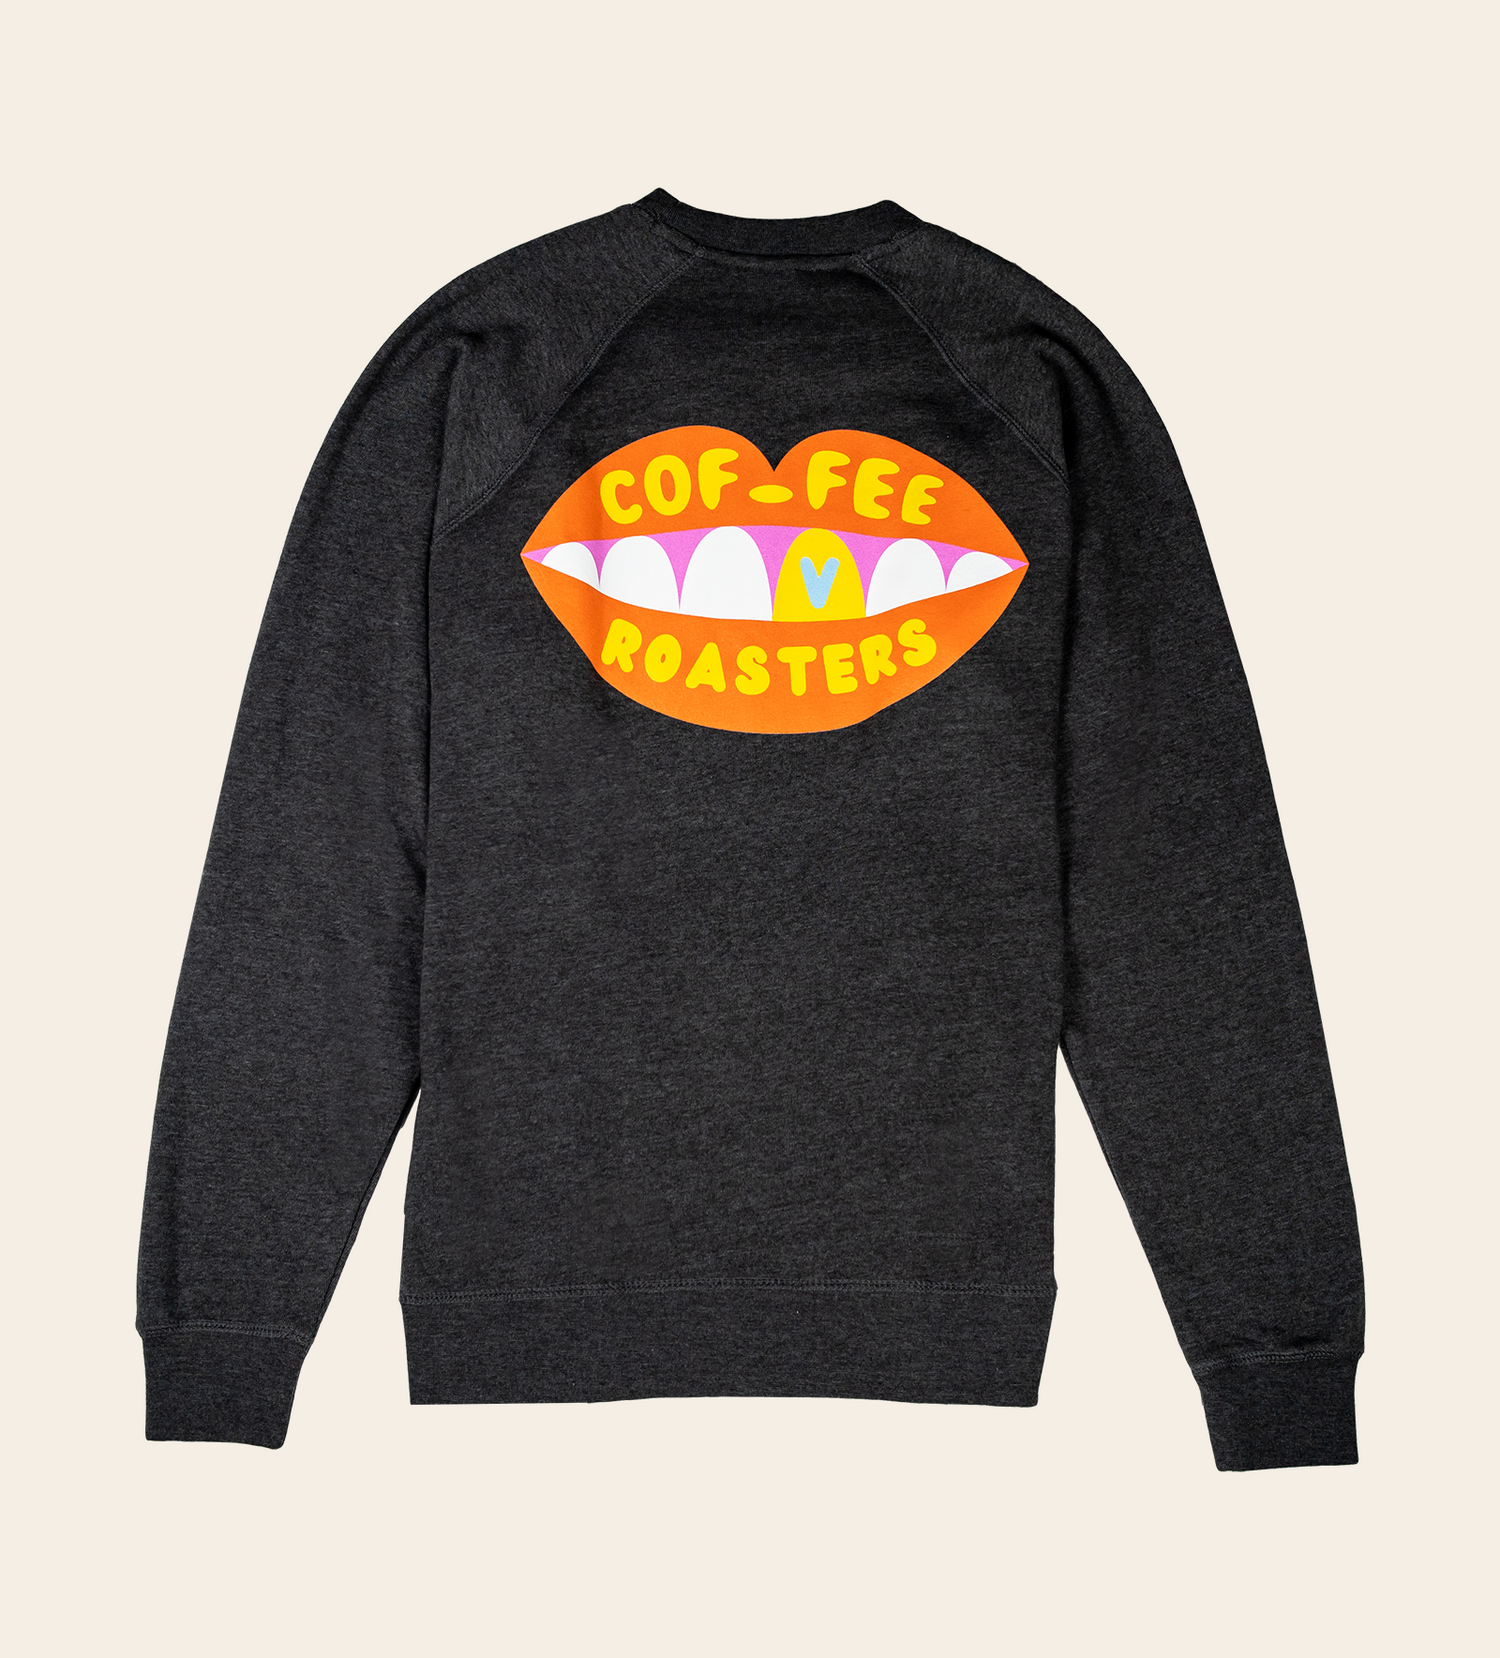 Gold Grin Crewneck back. "Coffee Roasters" text in the back. 